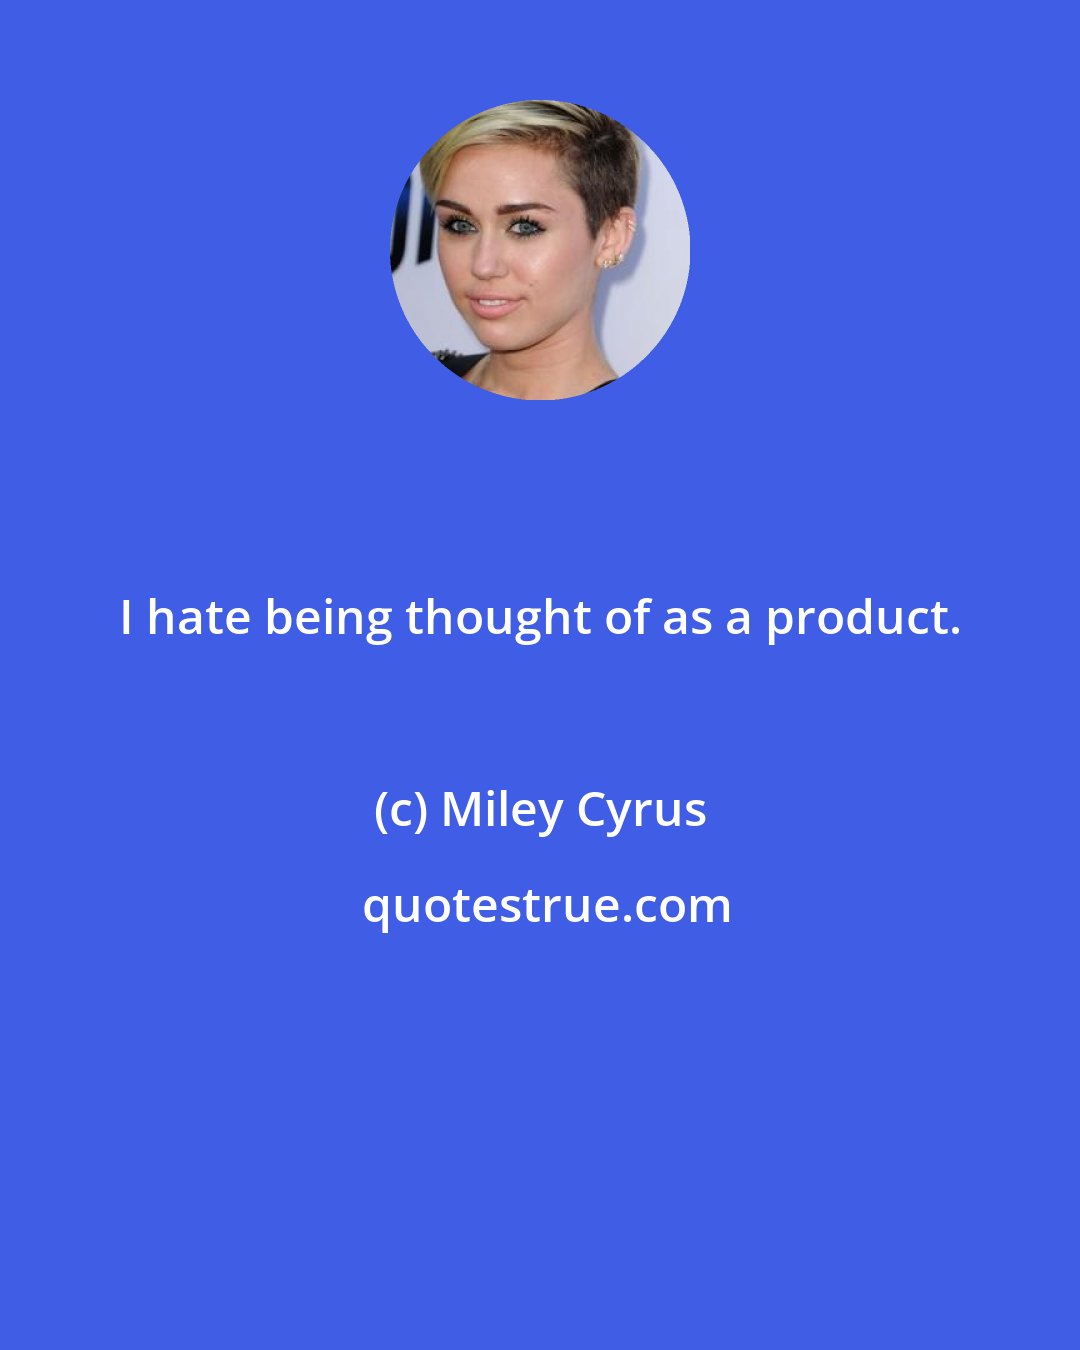 Miley Cyrus: I hate being thought of as a product.